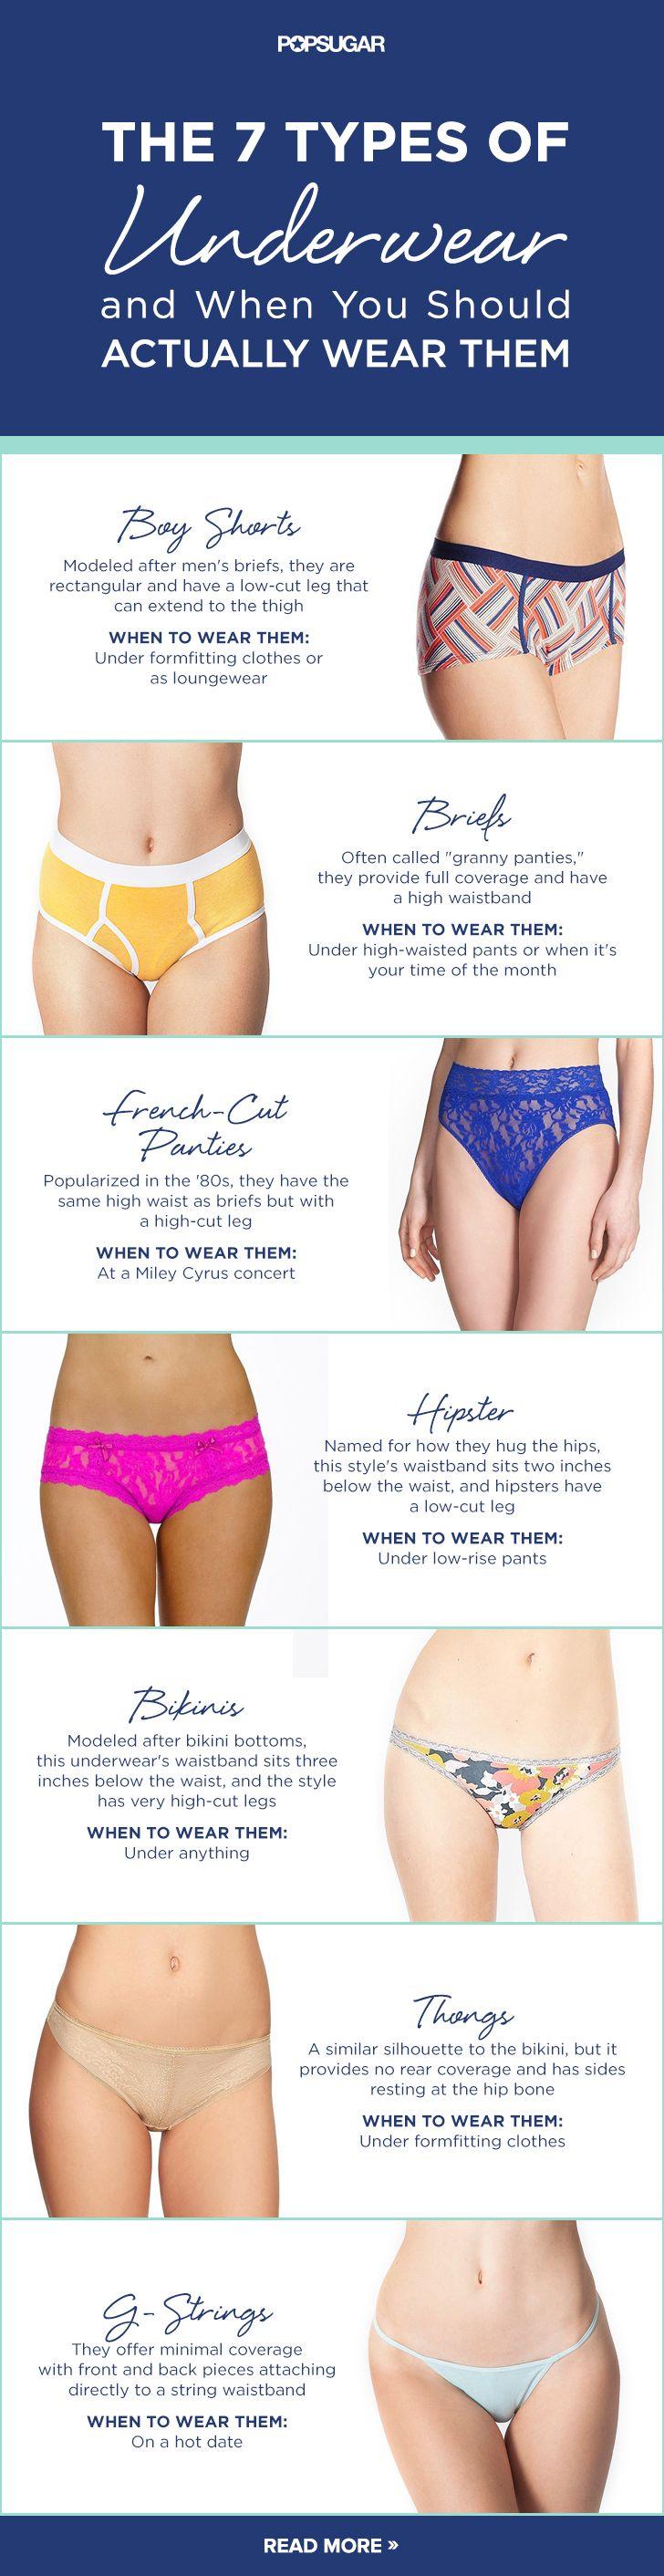 Wedding - The 7 Types Of Underwear And When You Should Actually Wear Them